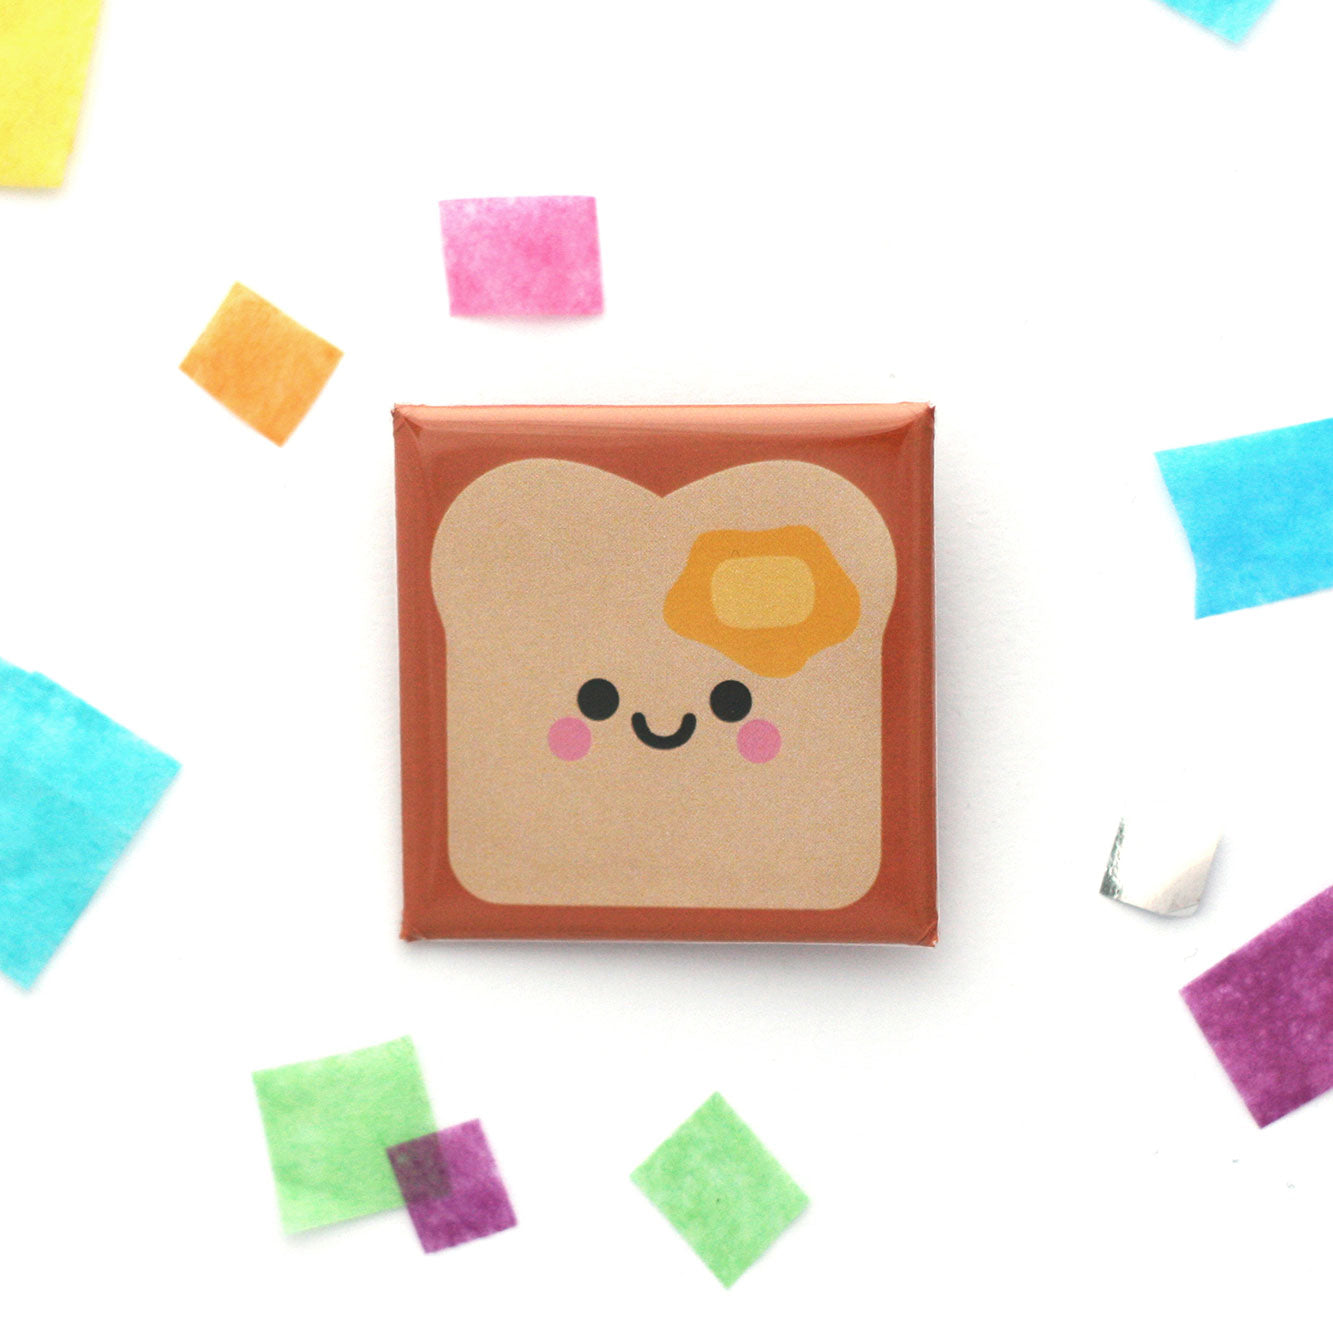 Buttered toast 38mm square button badge